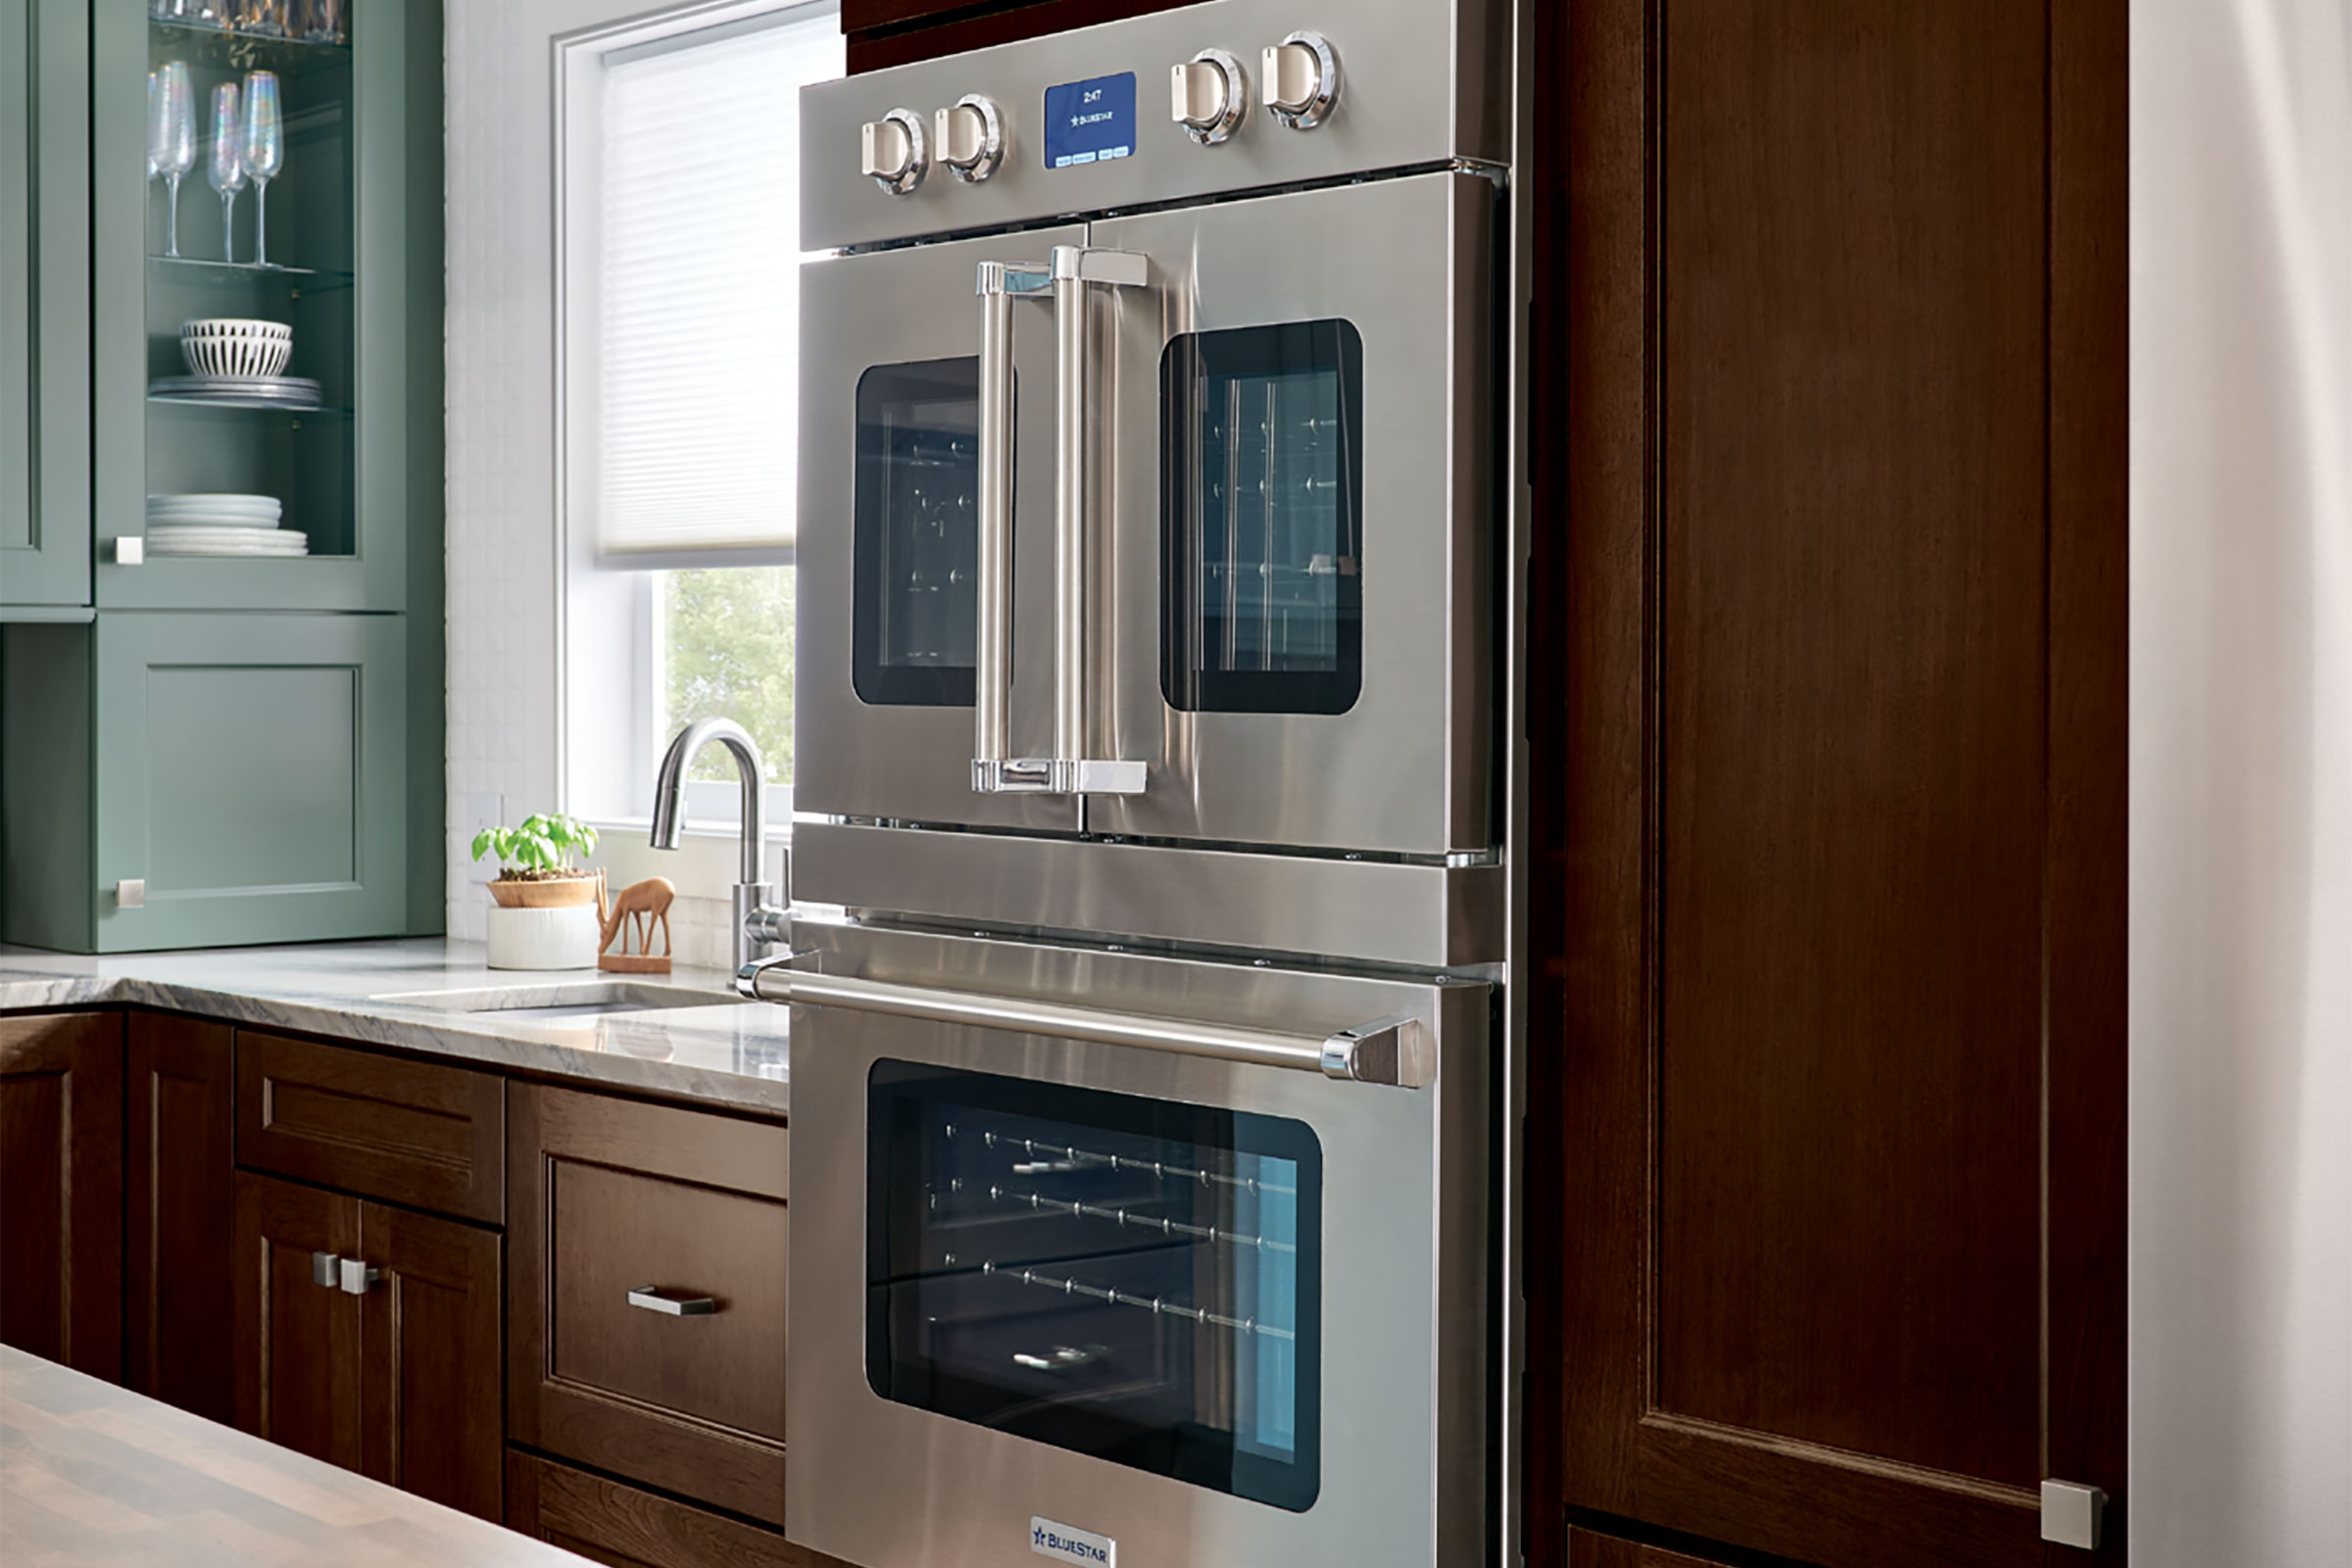 E Series Ovens: Perfectly Coordinated Appliances